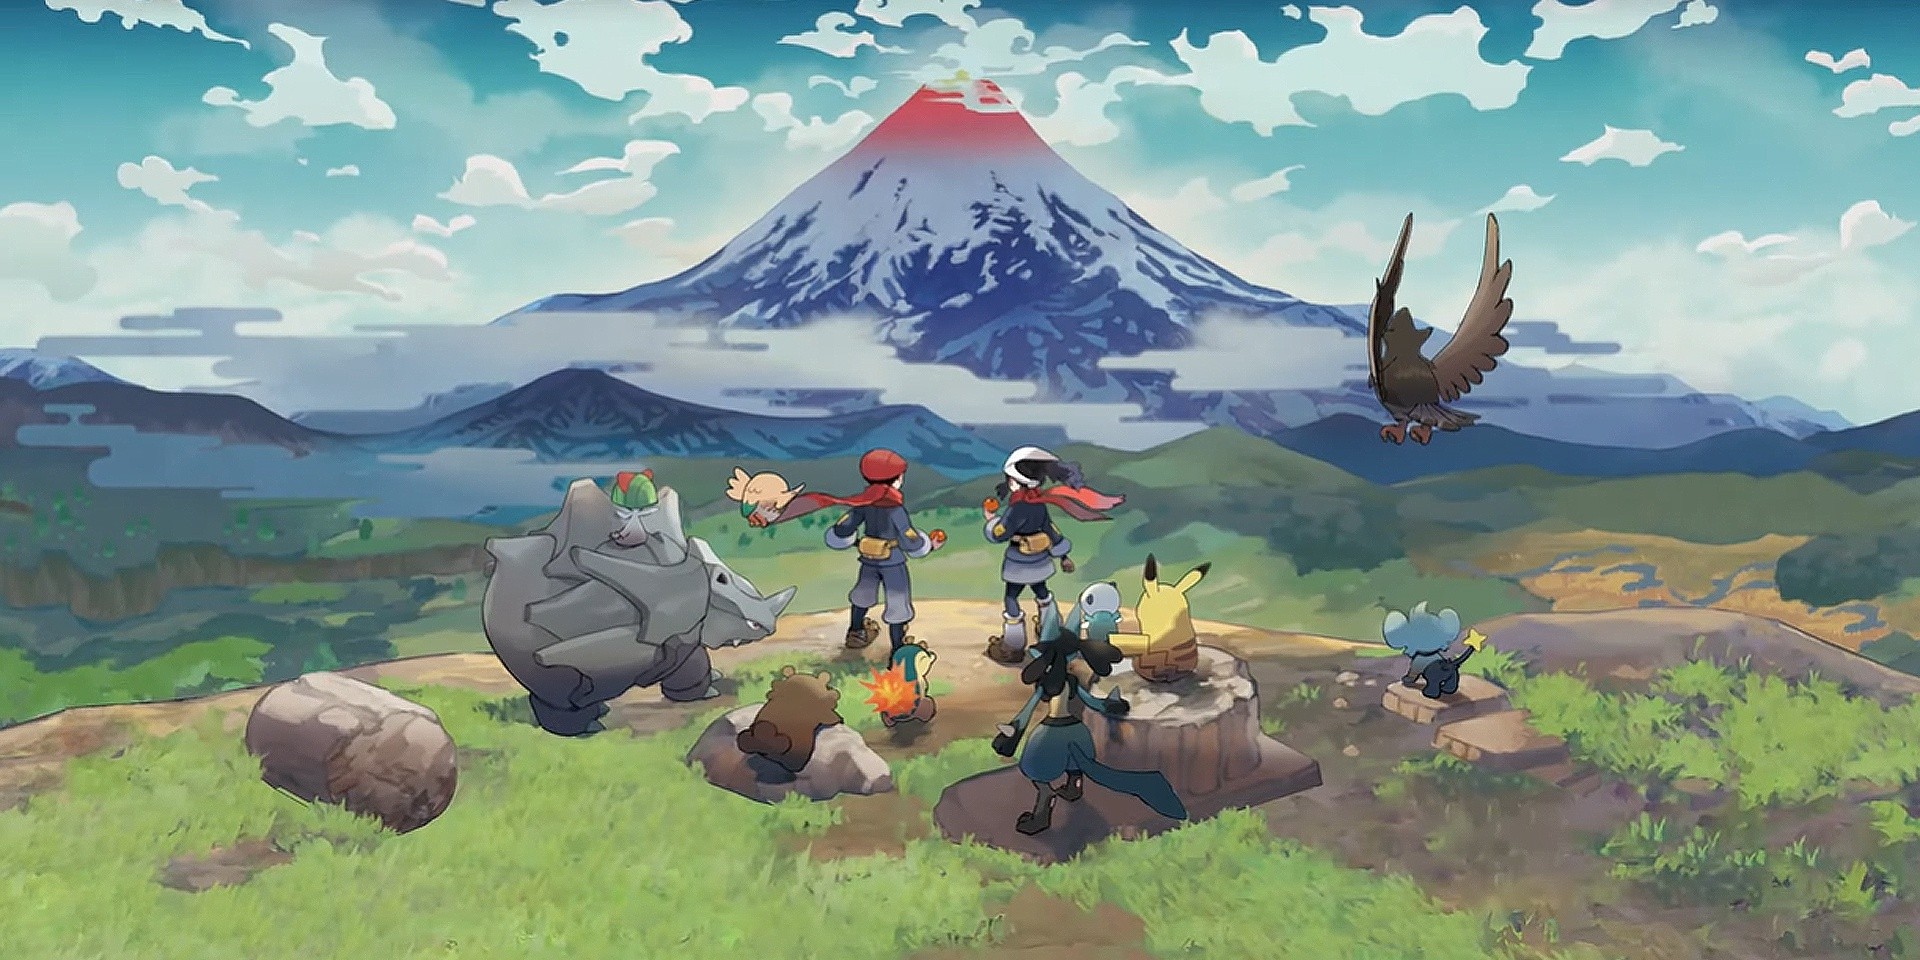 Pokémon Legends: Arceus introduces new open-world experience, revamped catching and battle system